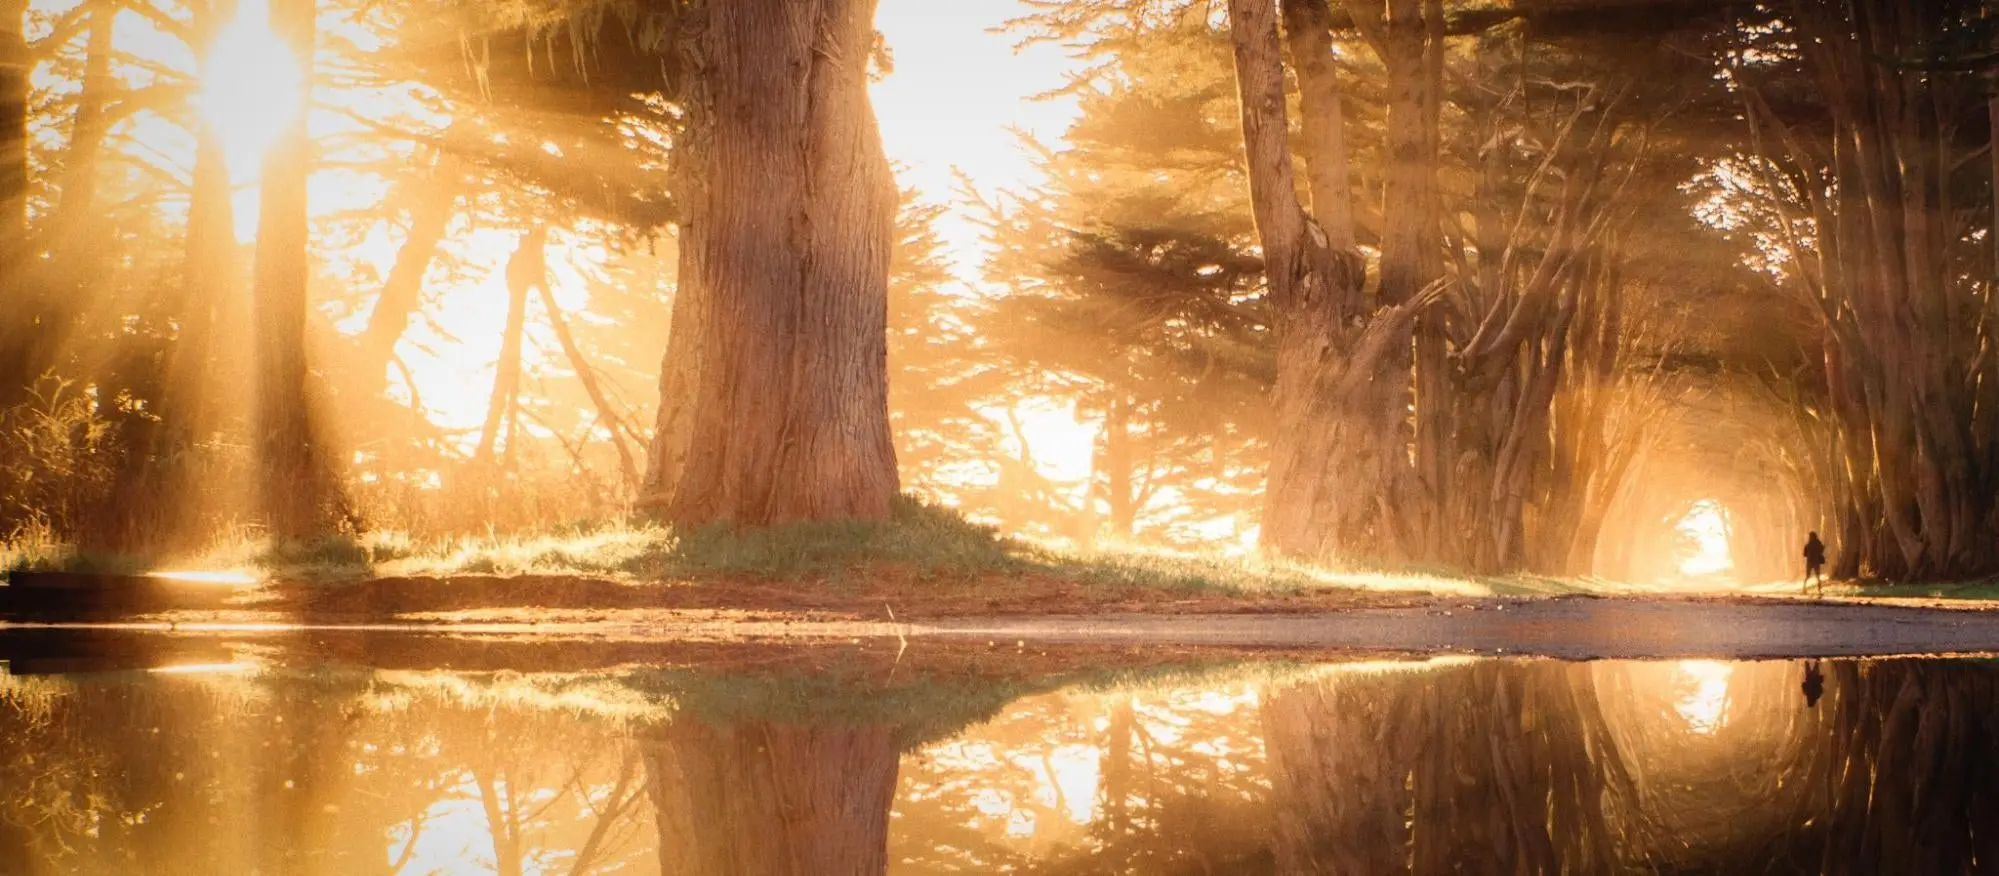 Photograph of a tree and its reflection on water during the golden hour. 